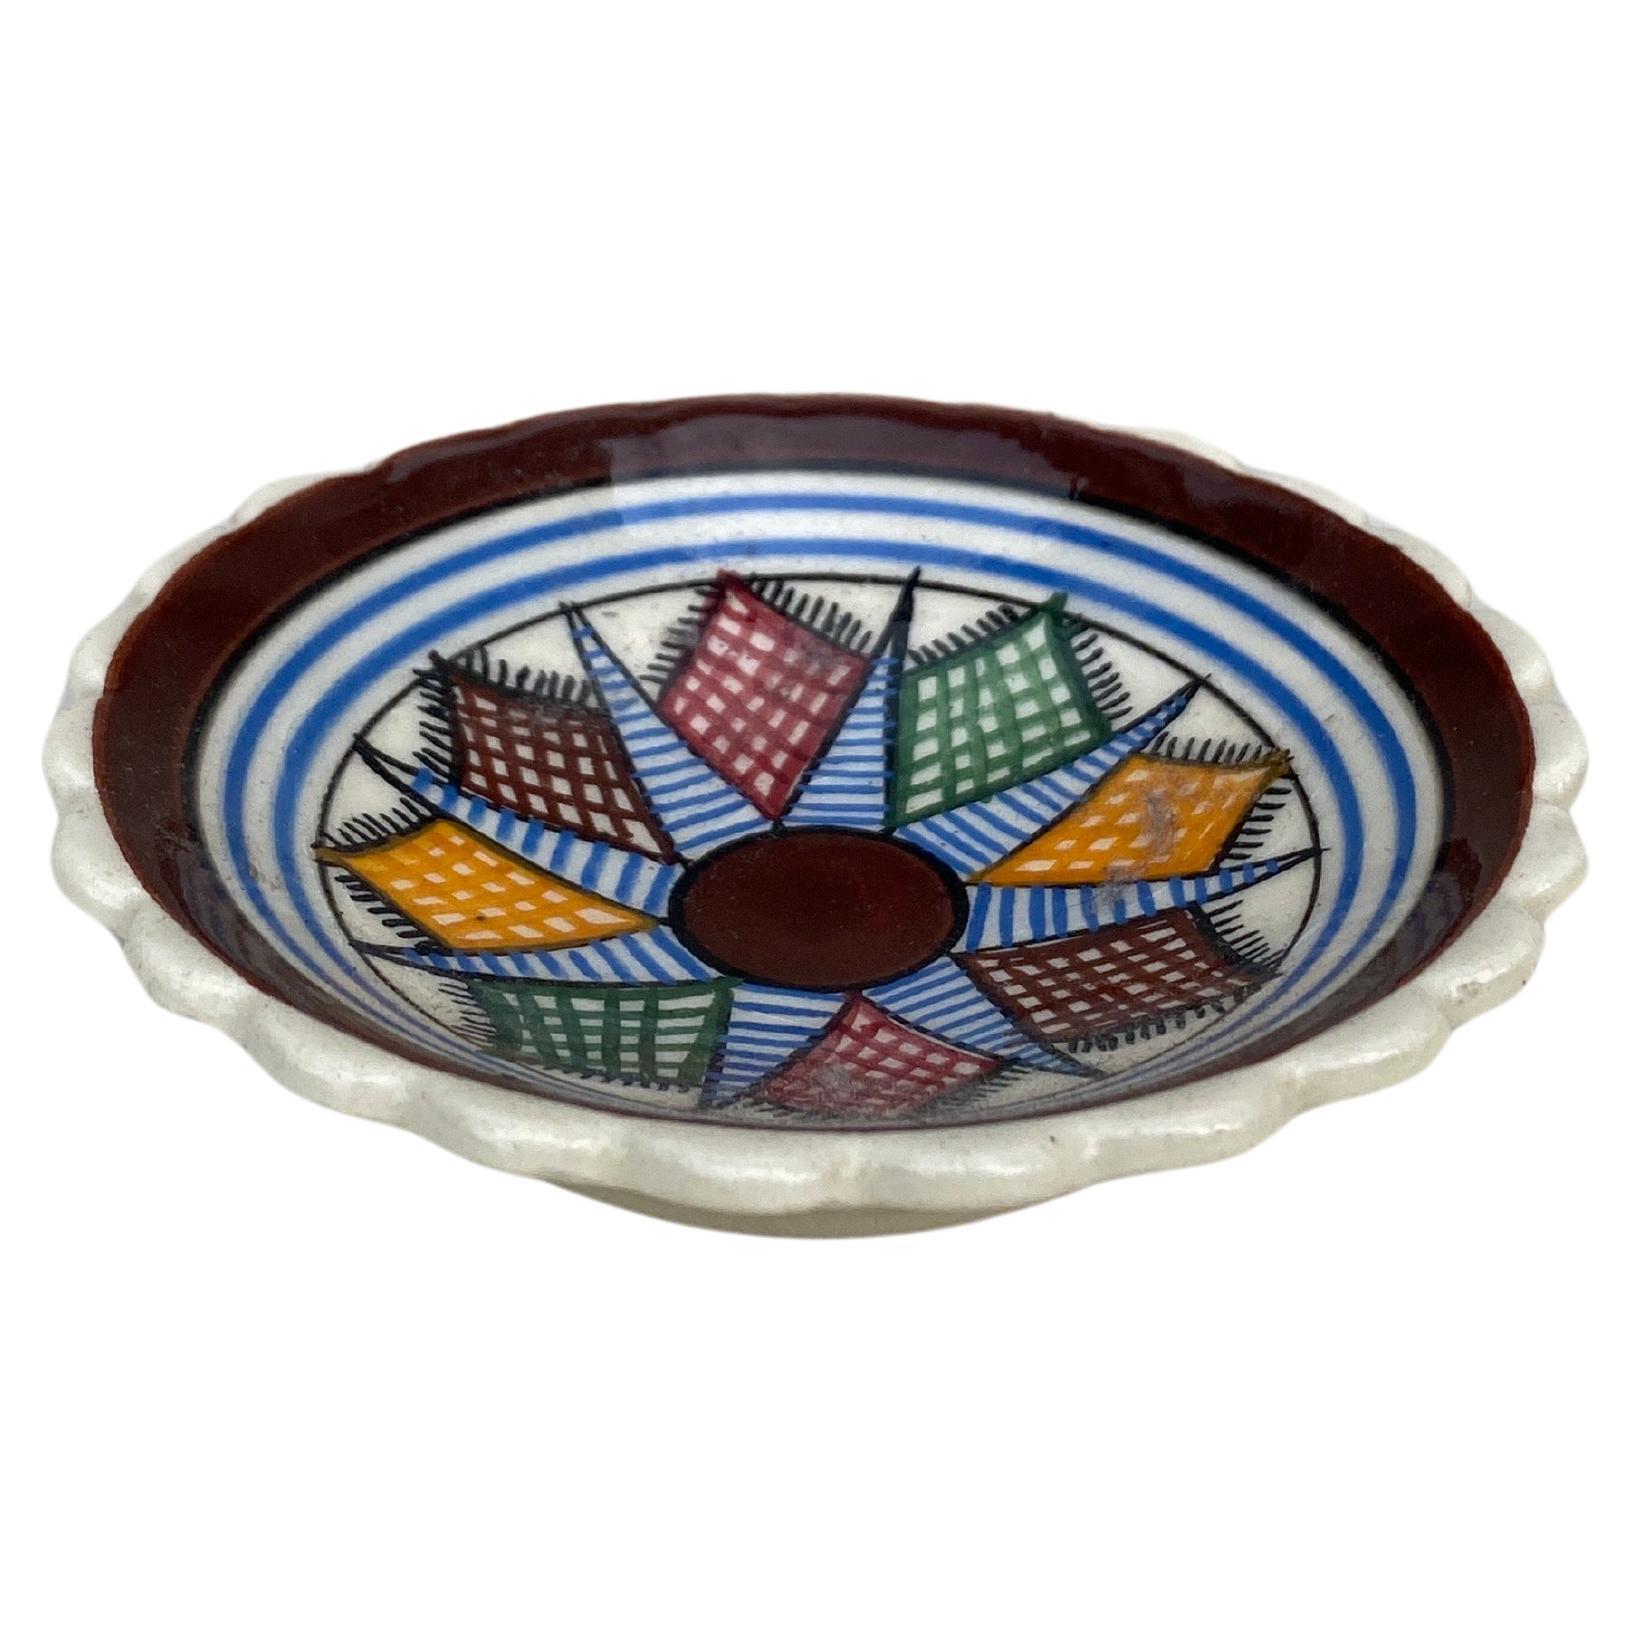 Small French Faience Bowl Henriot Quimper Circa 1930.